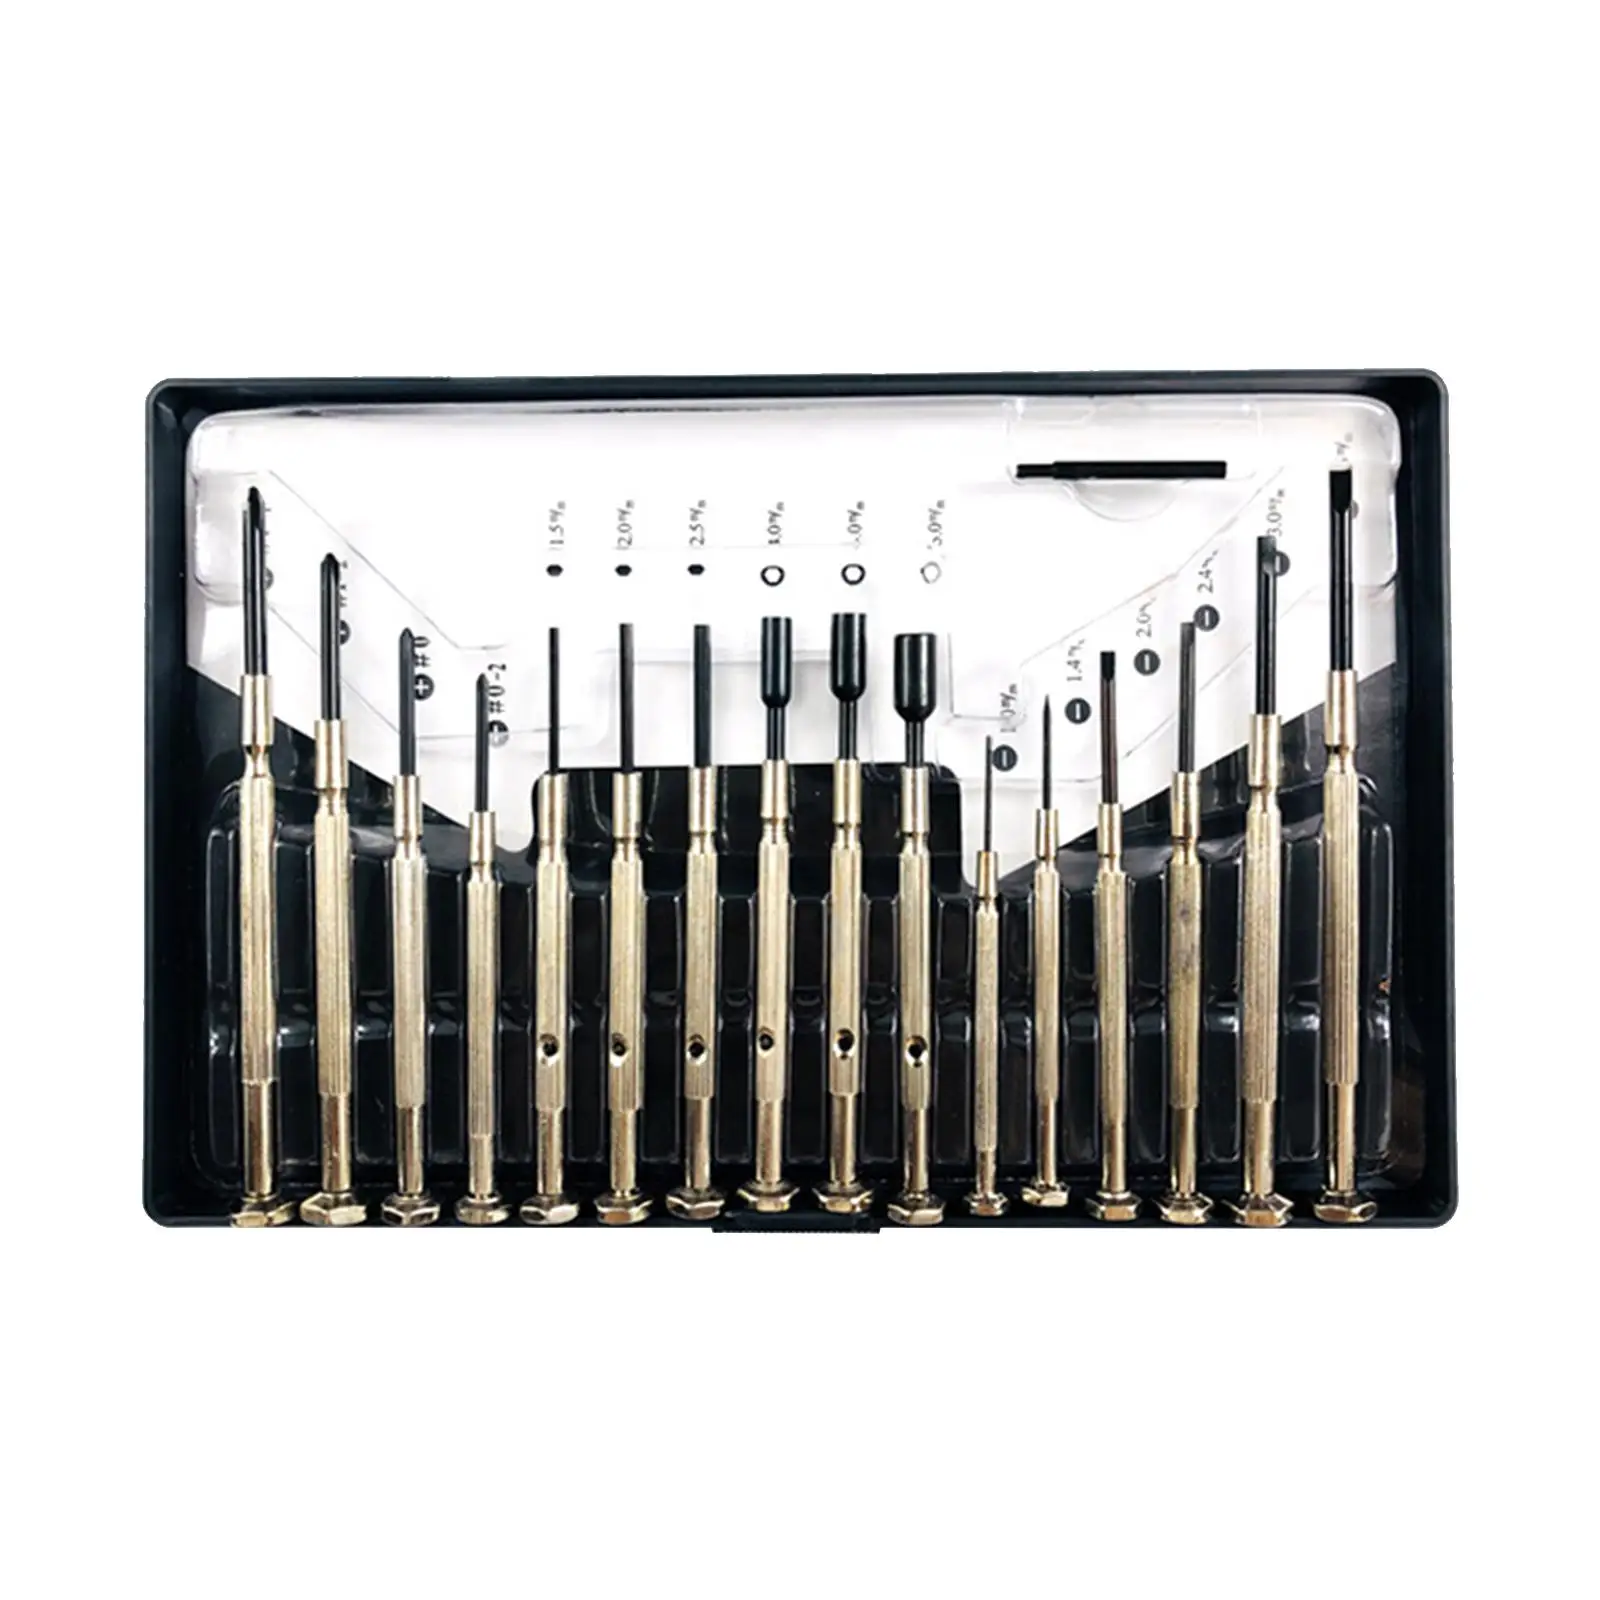 

16 Pieces Precision Screwdriver Set Multifunctional Nutdriver Glasses Screwdriver for Electronics Watch Eyeglasses Watches PC